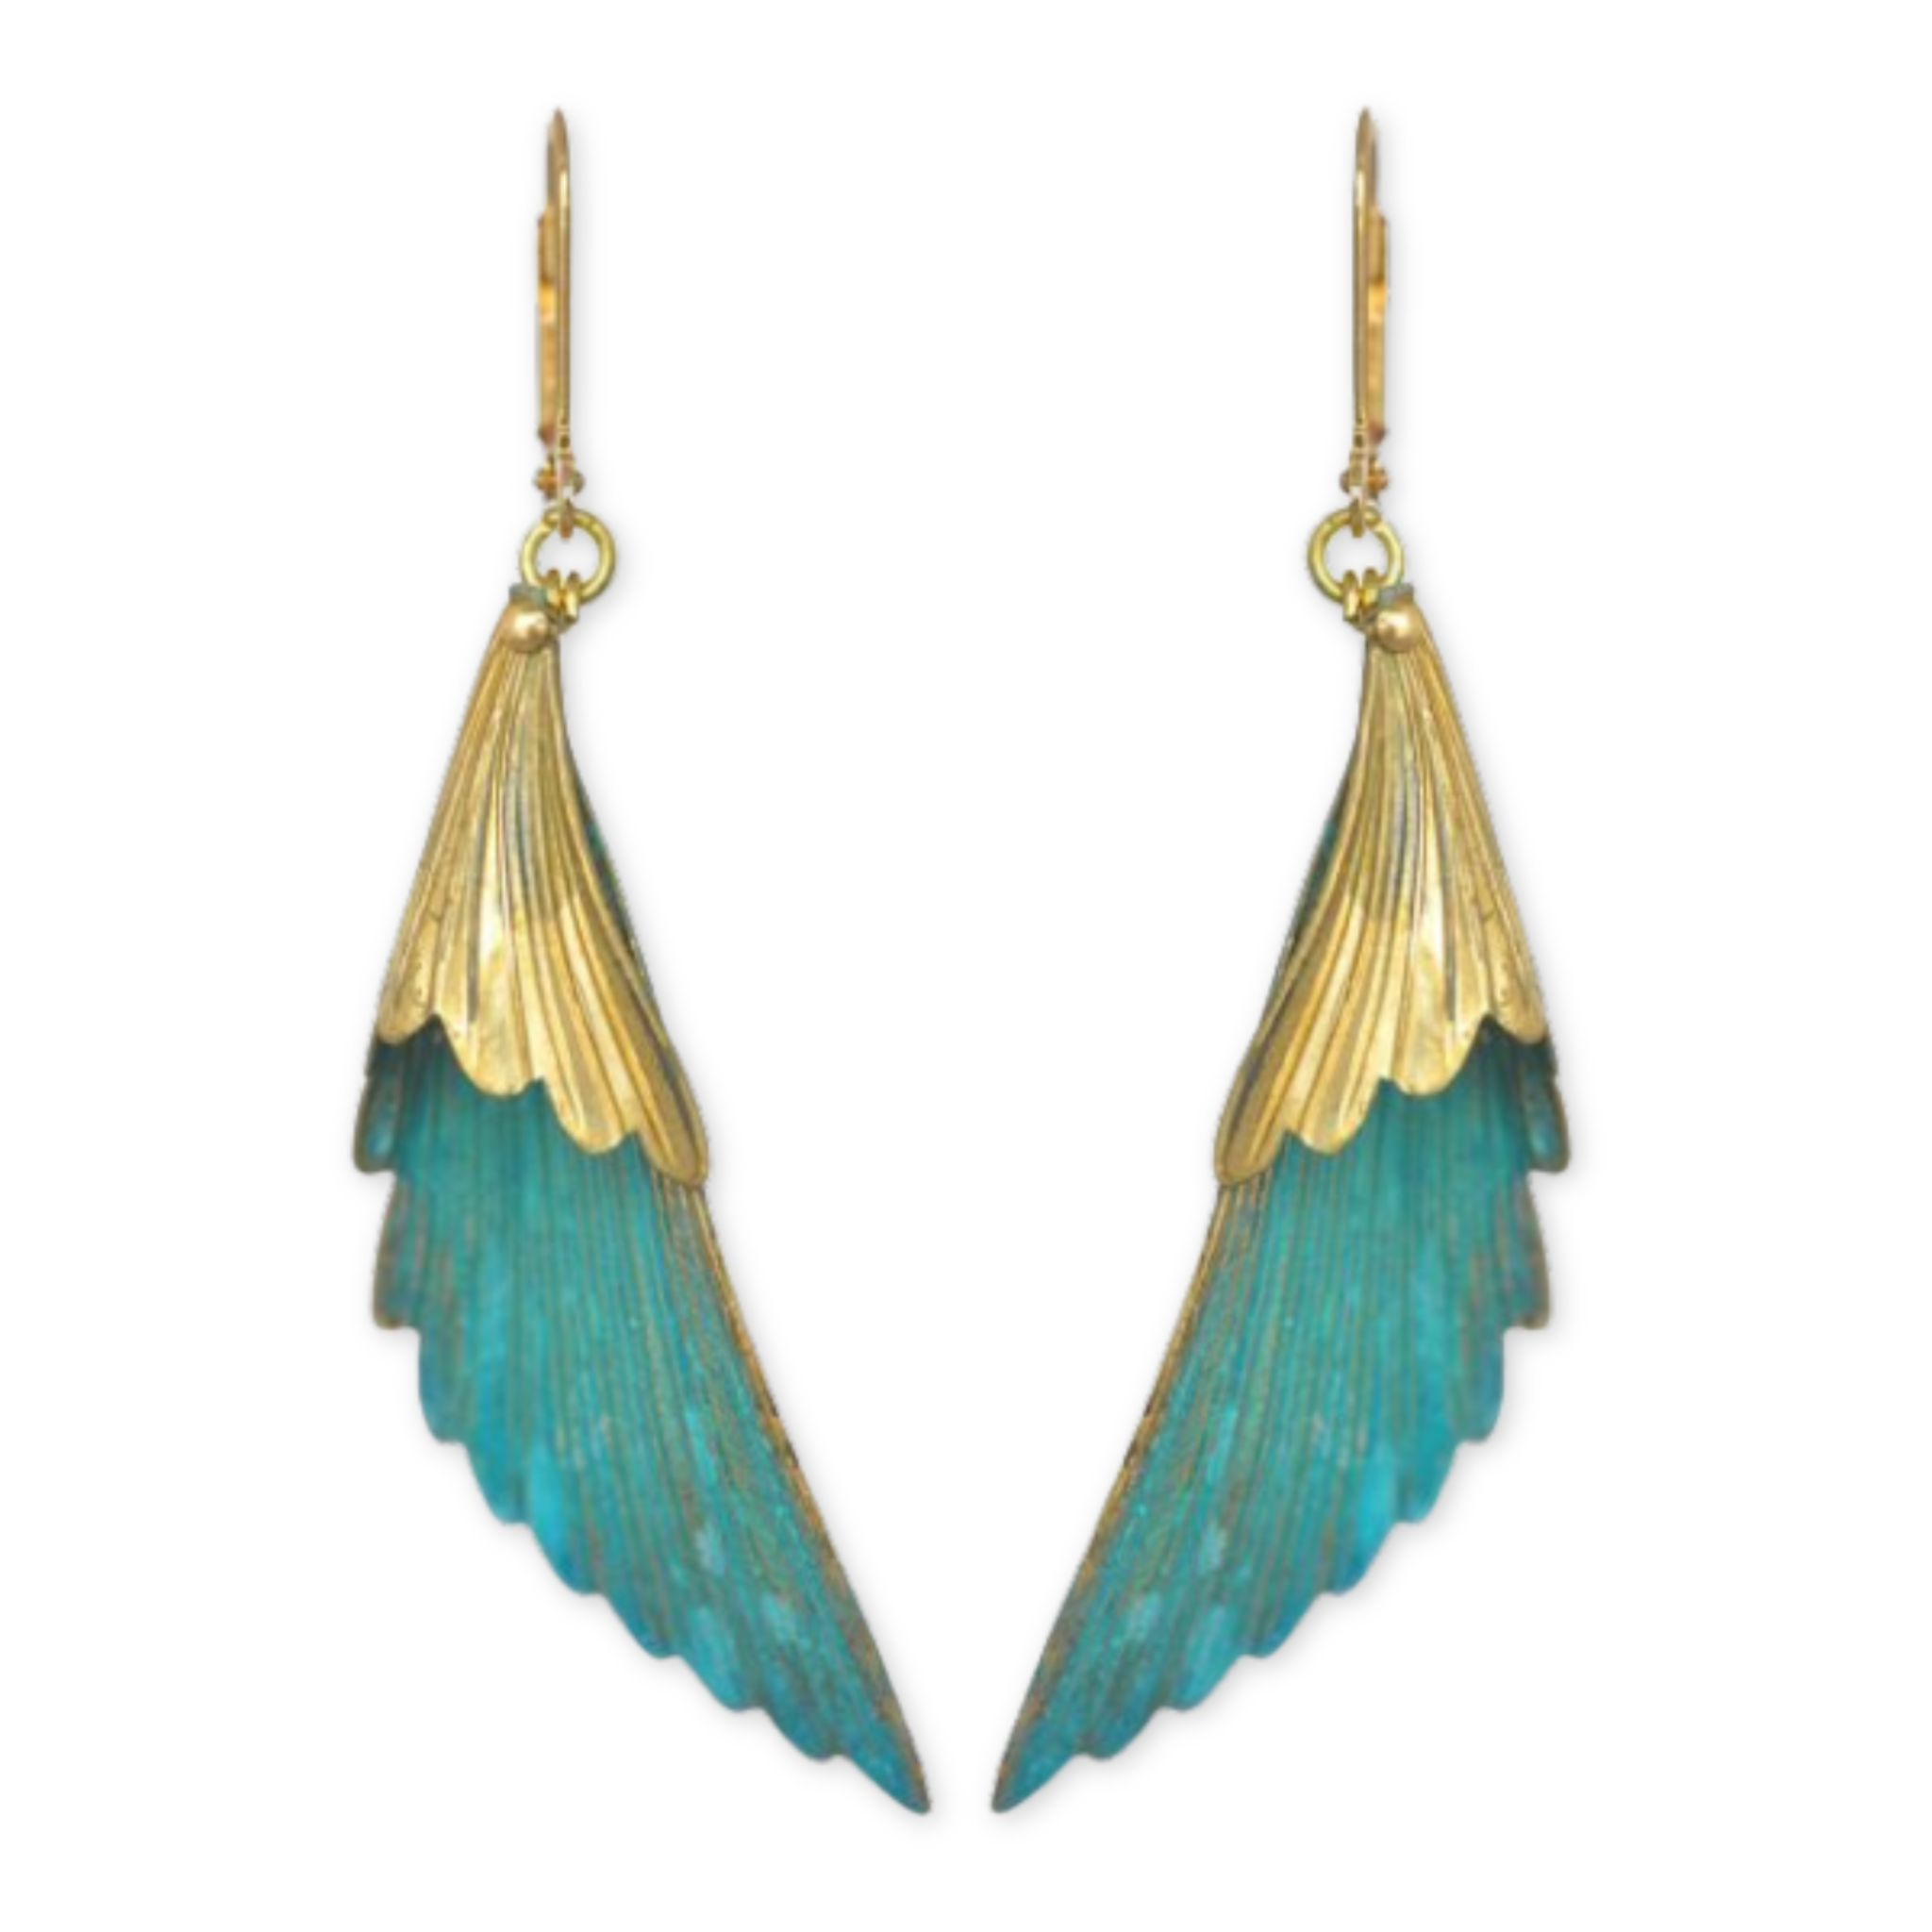 gold and patina earrings in the shape of gentle wings